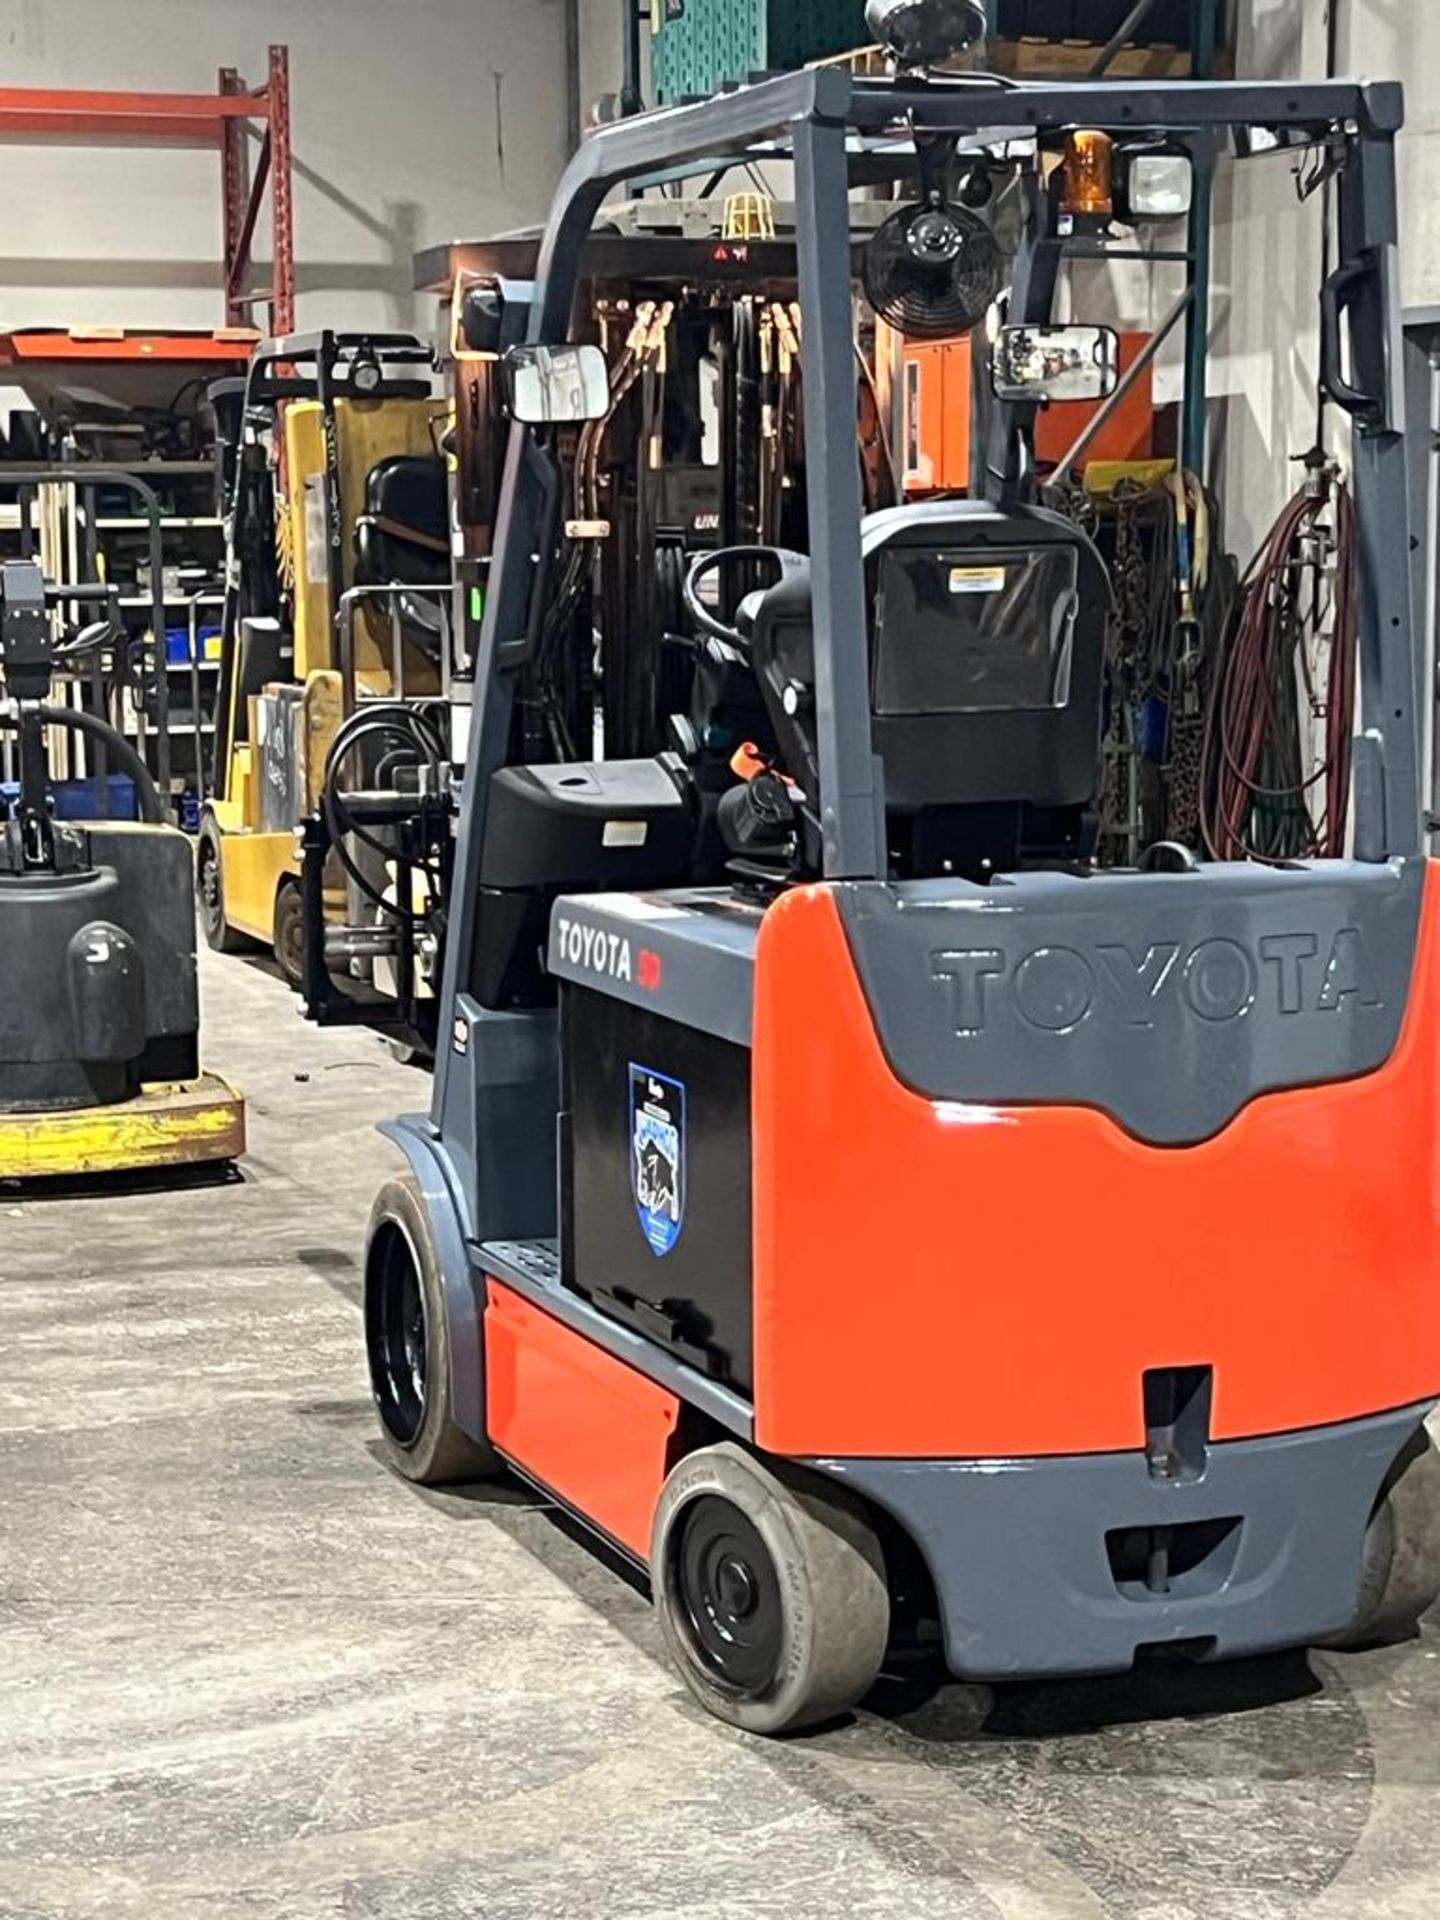 2017 Toyota 50 - 5,000lbs Capacity Electric Forklift 4-STAGE MAST with Sideshift & Fork Positioner - - Image 2 of 3